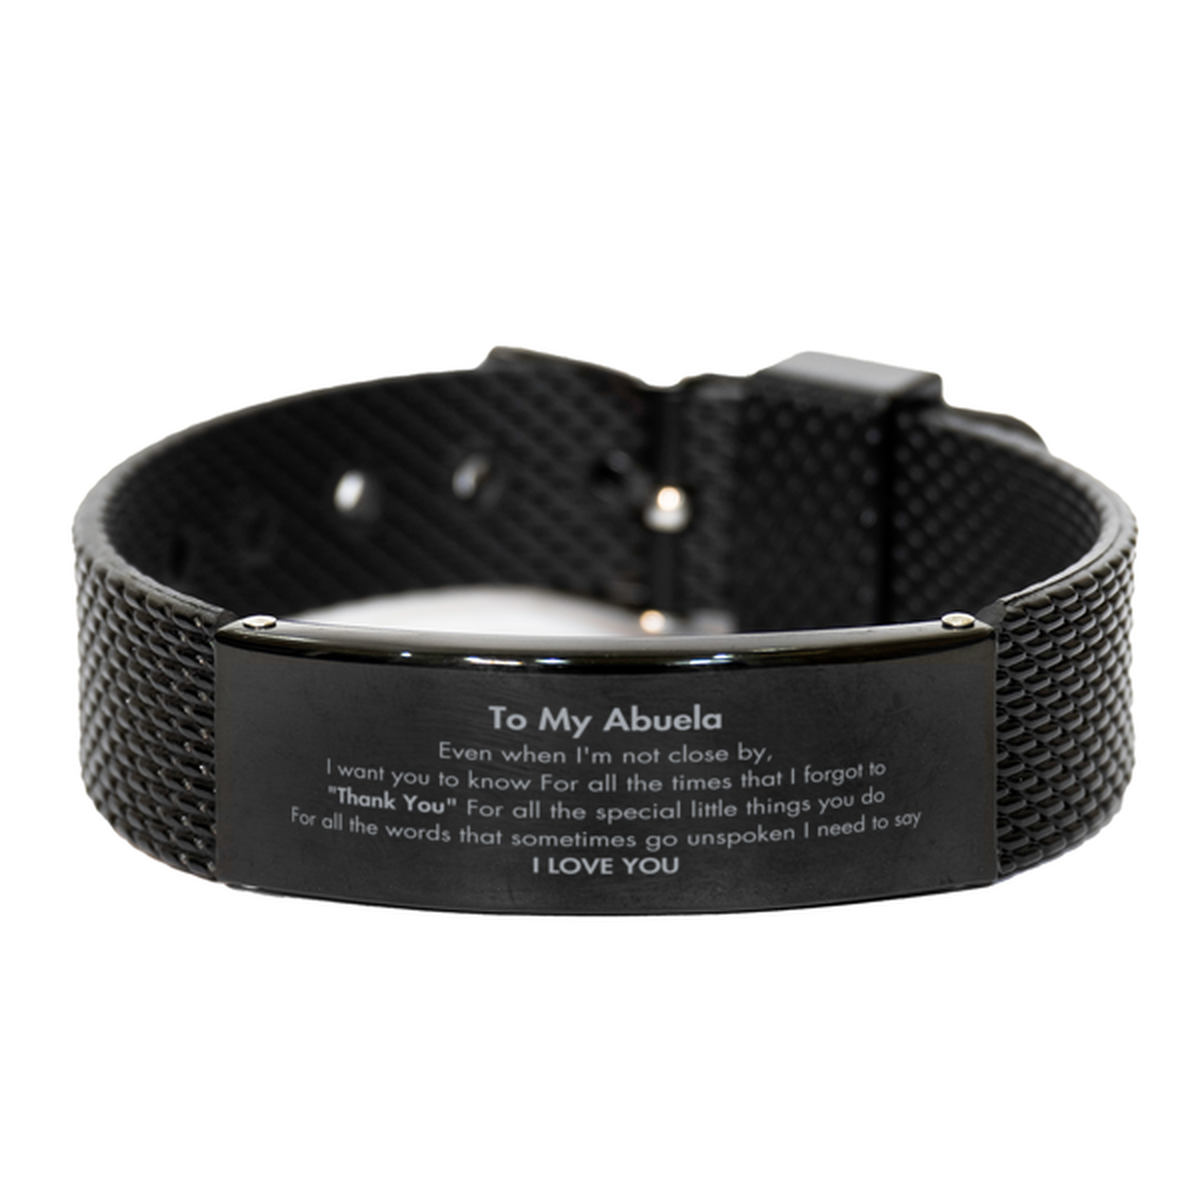 Thank You Gifts for Abuela, Keepsake Black Shark Mesh Bracelet Gifts for Abuela Birthday Mother's day Father's Day Abuela For all the words That sometimes go unspoken I need to say I LOVE YOU